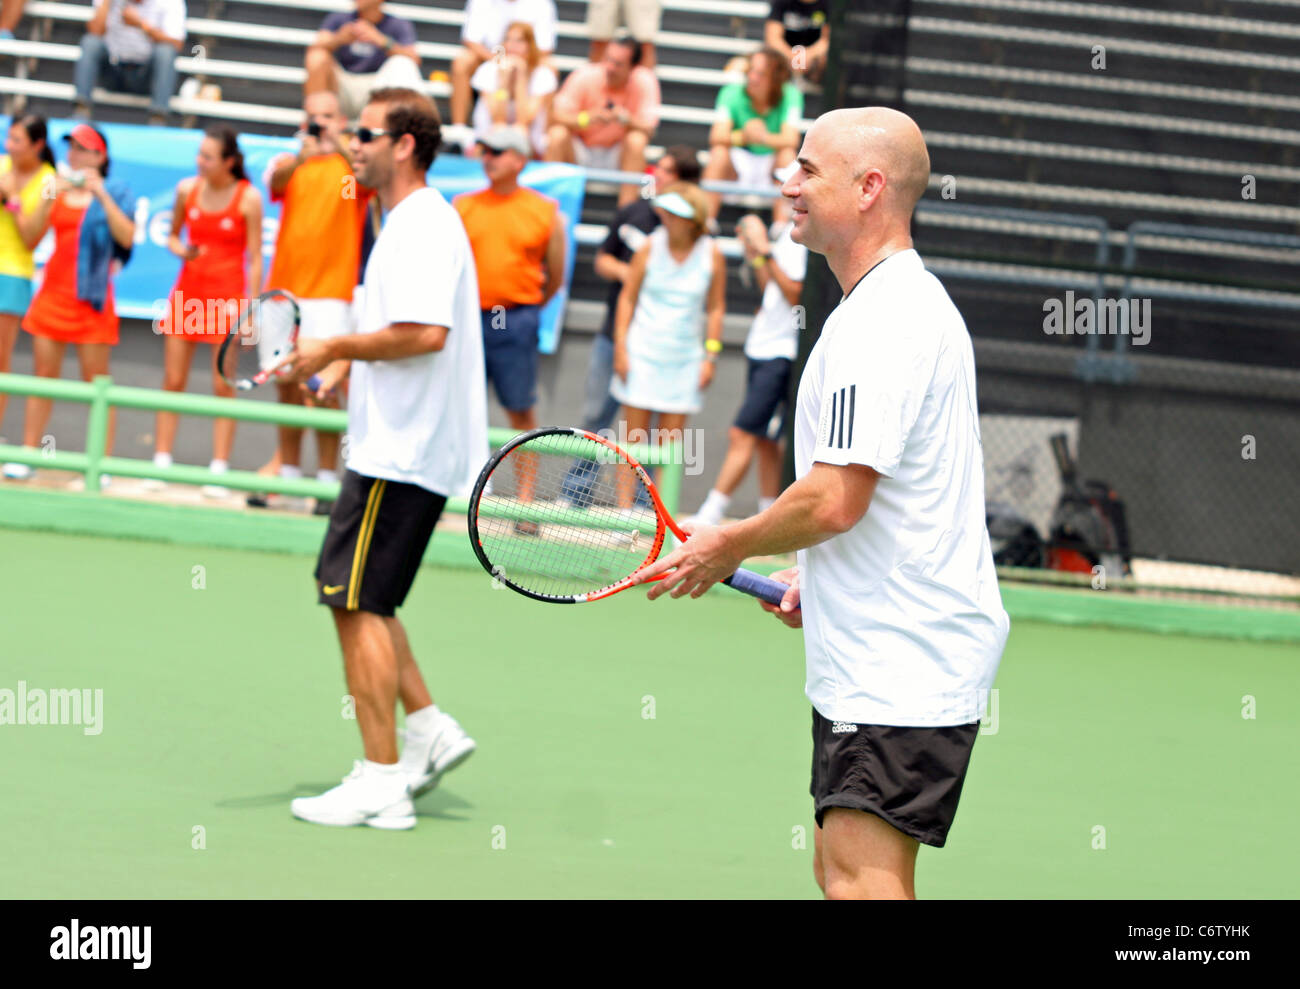 Tennis pros Andre Agassi and Pete Sampras open a free Tennis Clinic to encourage young children to get into the game San Juan, Stock Photo